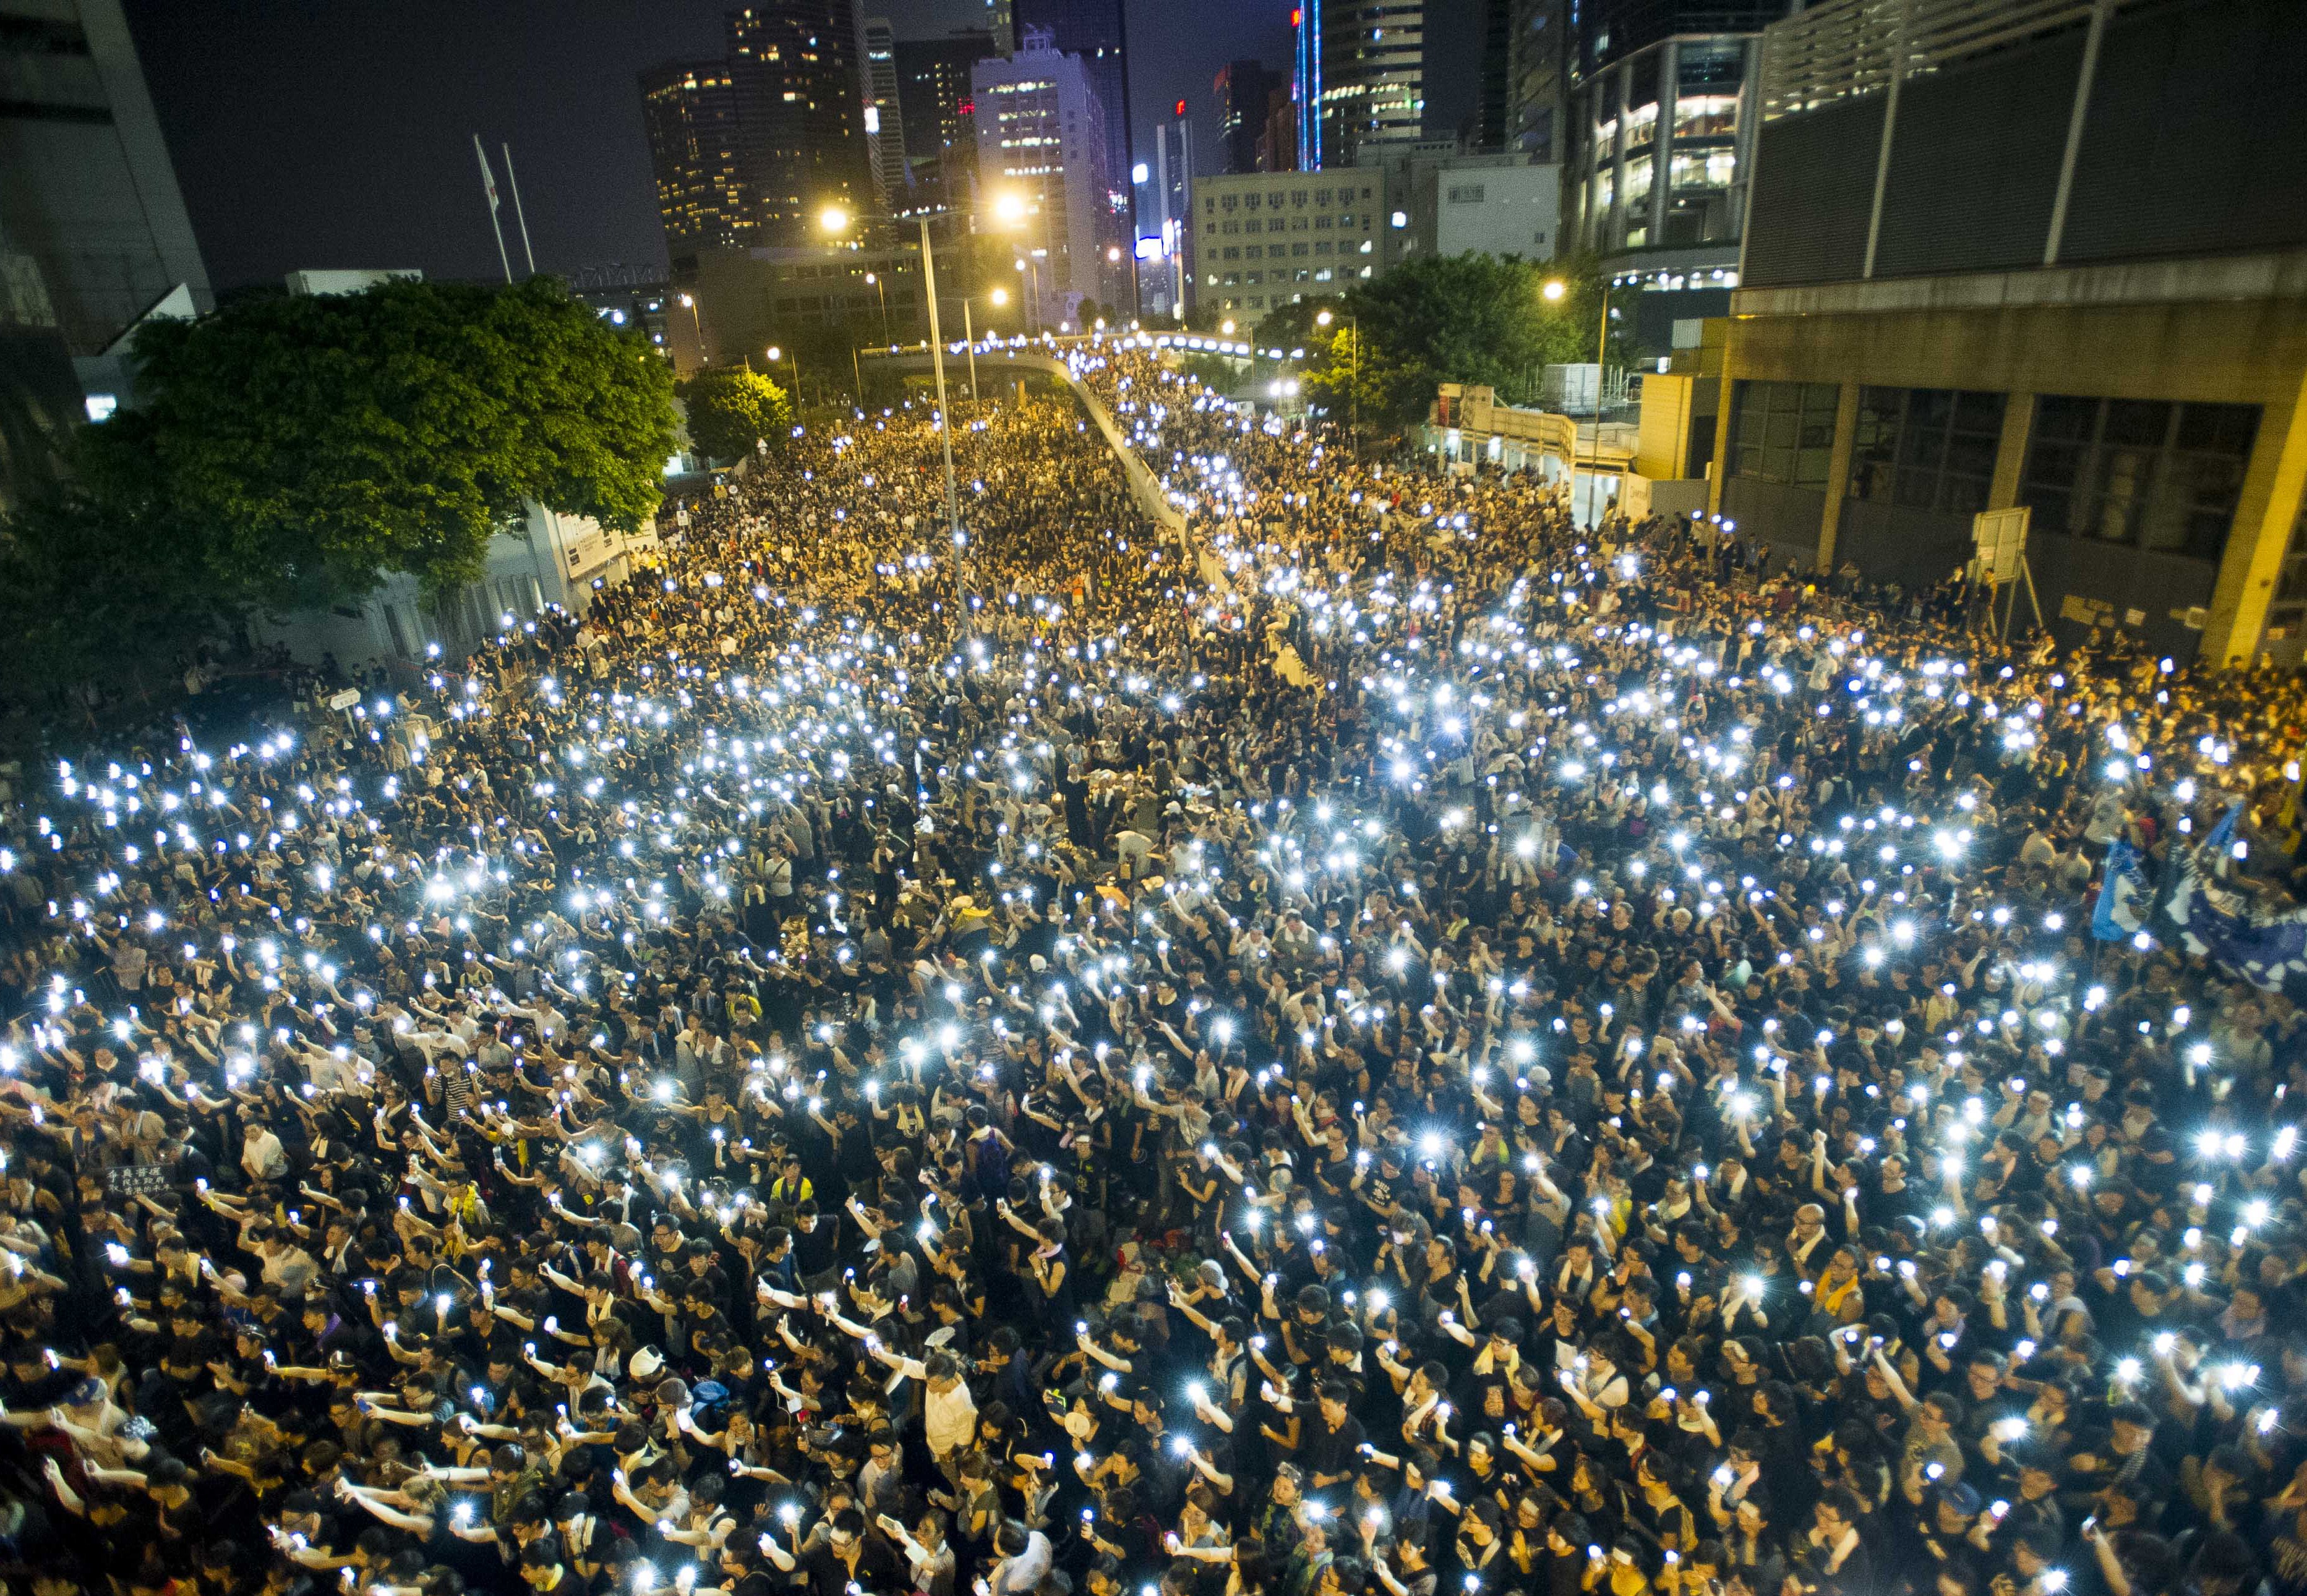 Protestors and student demonstrators hold up their cell phones in a display of solidarity during a protest outside the headquarters of Legislative Council in Hong Kong on Sept. 29, 2014 (Xaume Olleros—AFP/Getty Images)